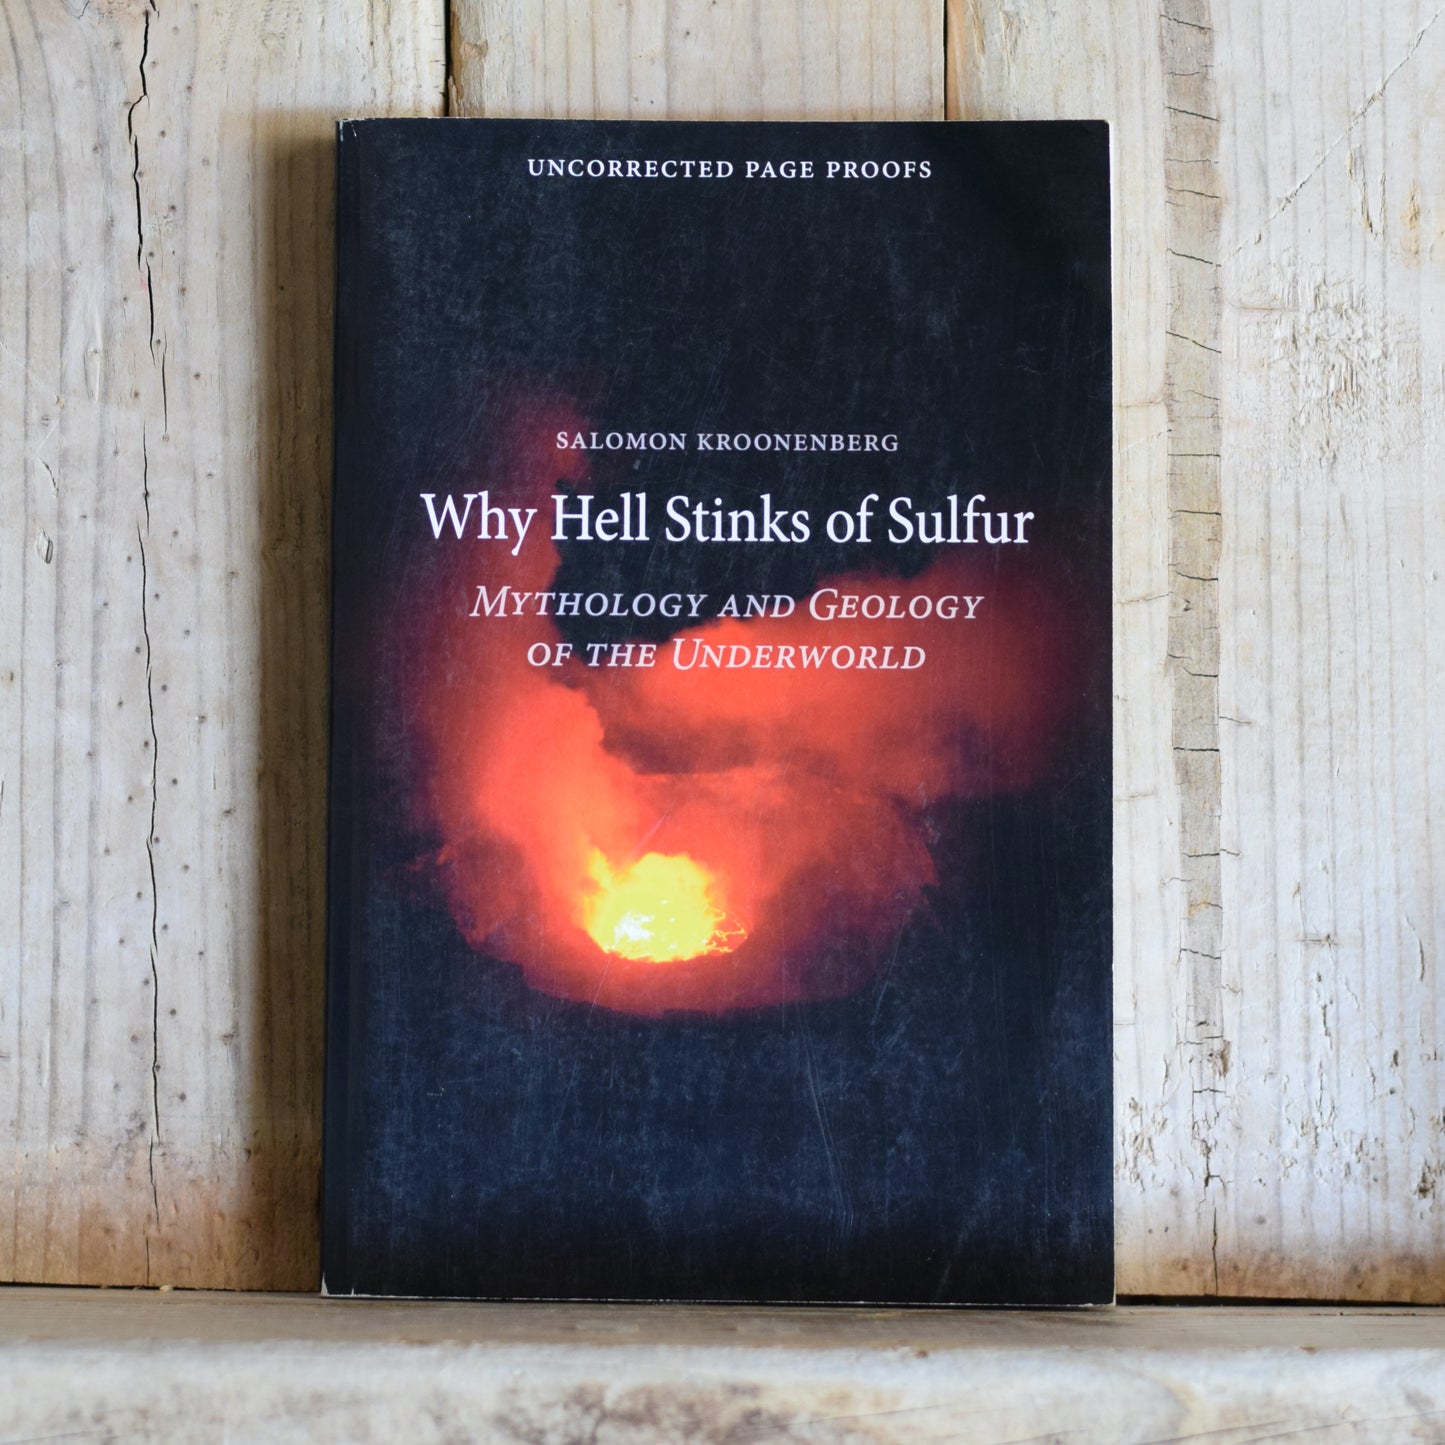 Non-fiction Paperback: Salomon Kroonenberg - Why Hell Stinks of Sulfur UNCORRECTED PROOF